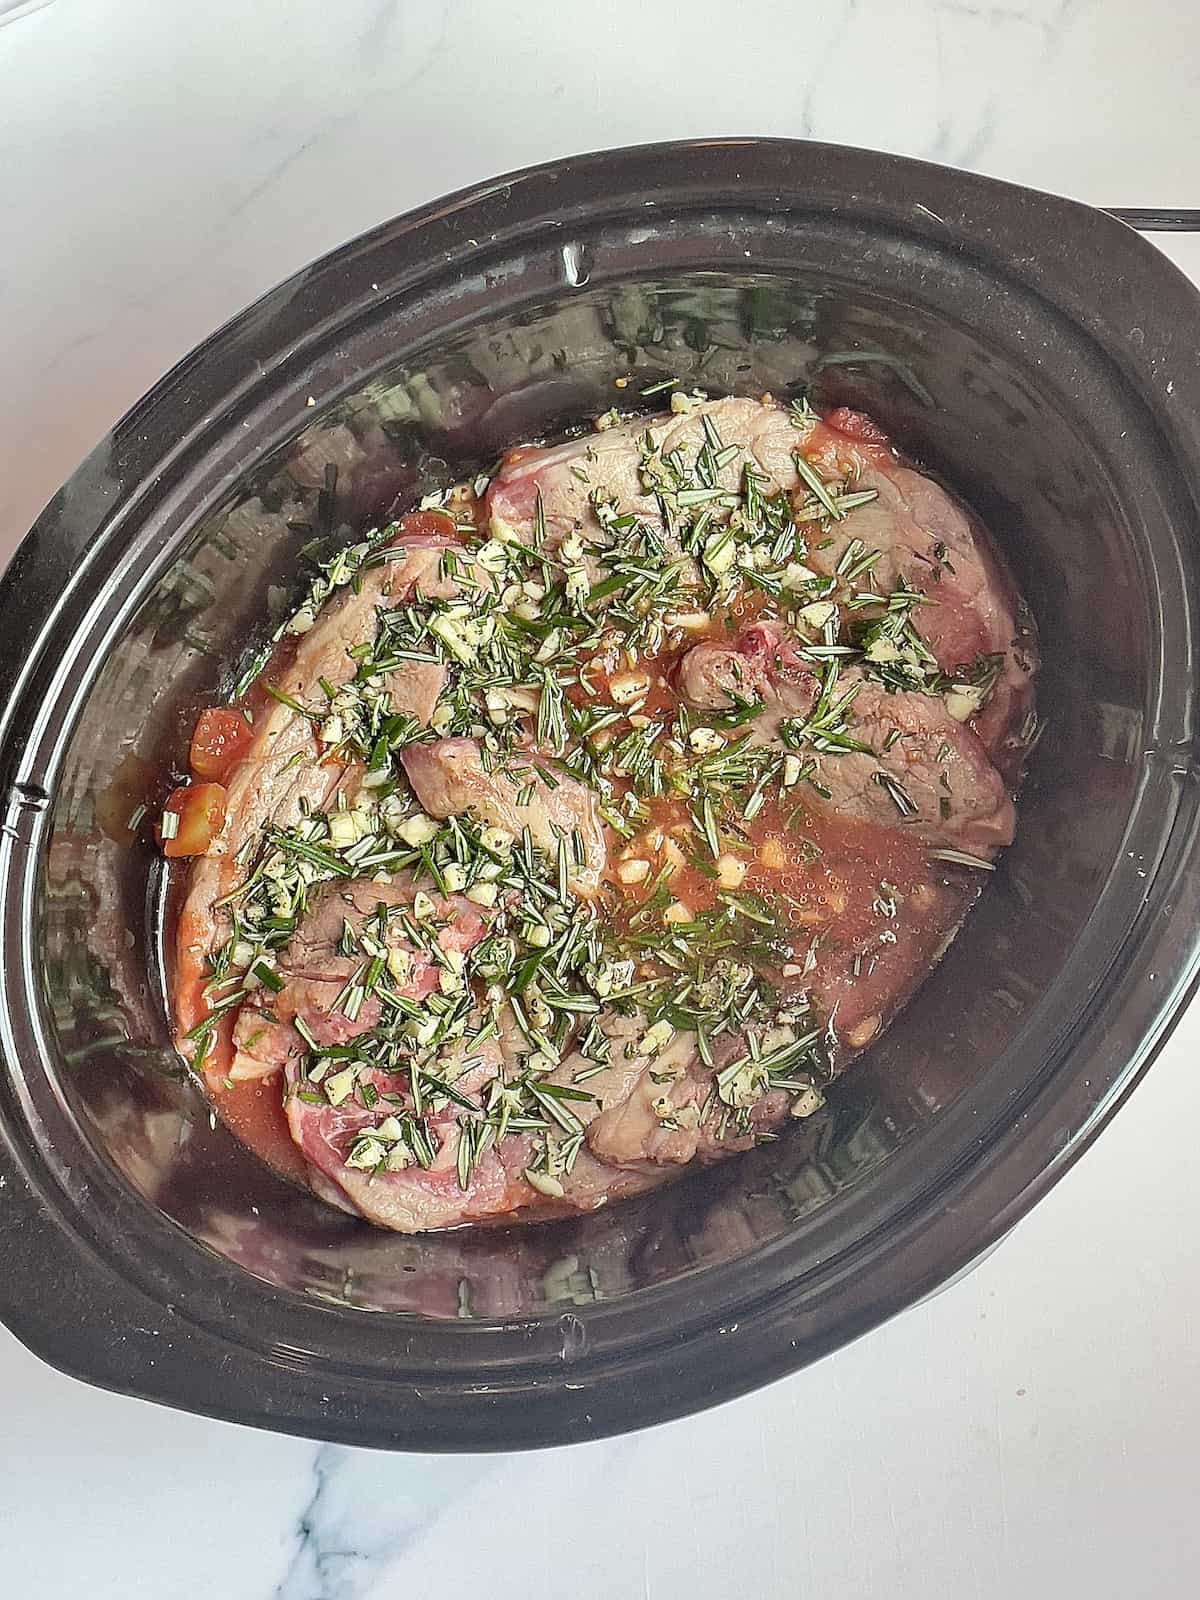 lamb, spices, seasonings, and tomatoes in a crockpot